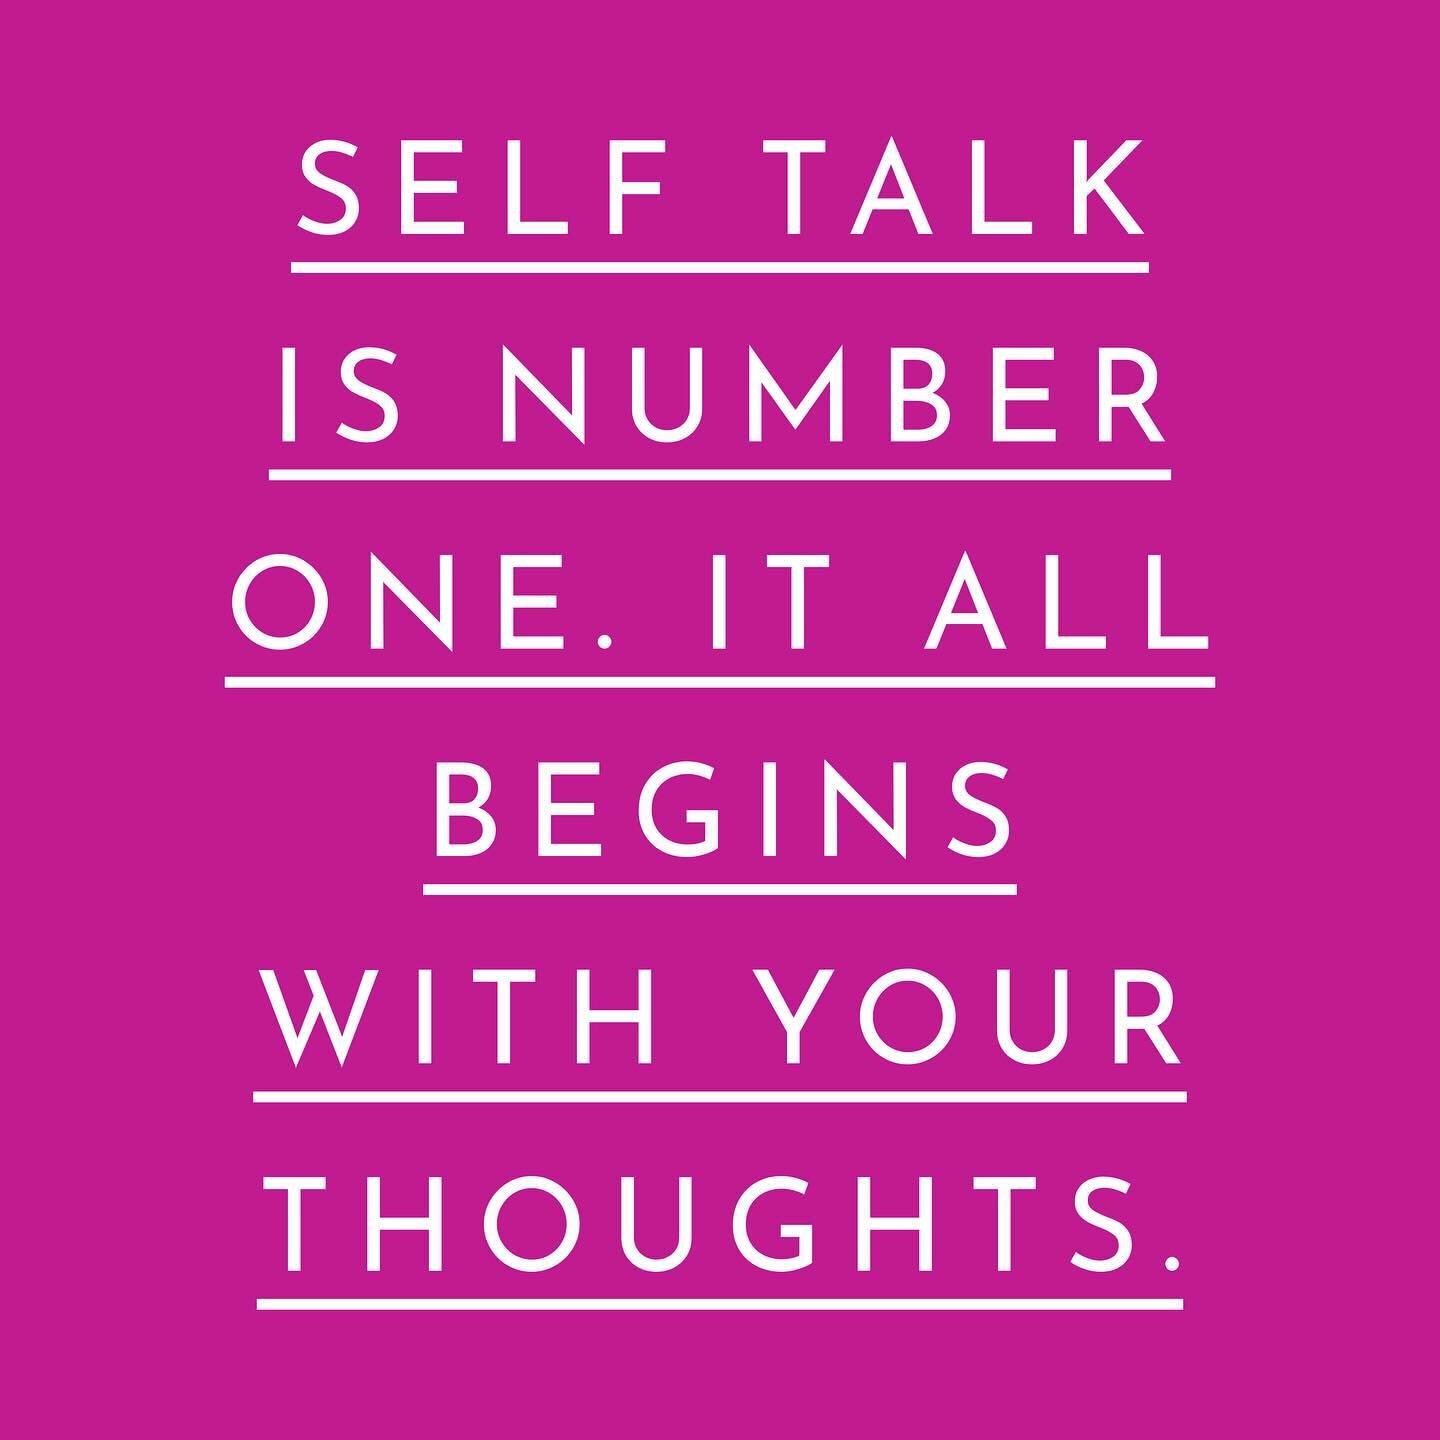 SELF-TALK IS NUMBER ONE!

&ldquo;Self talk is number one. It all begins with your thoughts.&rdquo;

OMG!
Self-talk is HUGELY important!

I should know! I was a champion of negative self-talk, back in the day!

It&rsquo;s important to know that our th